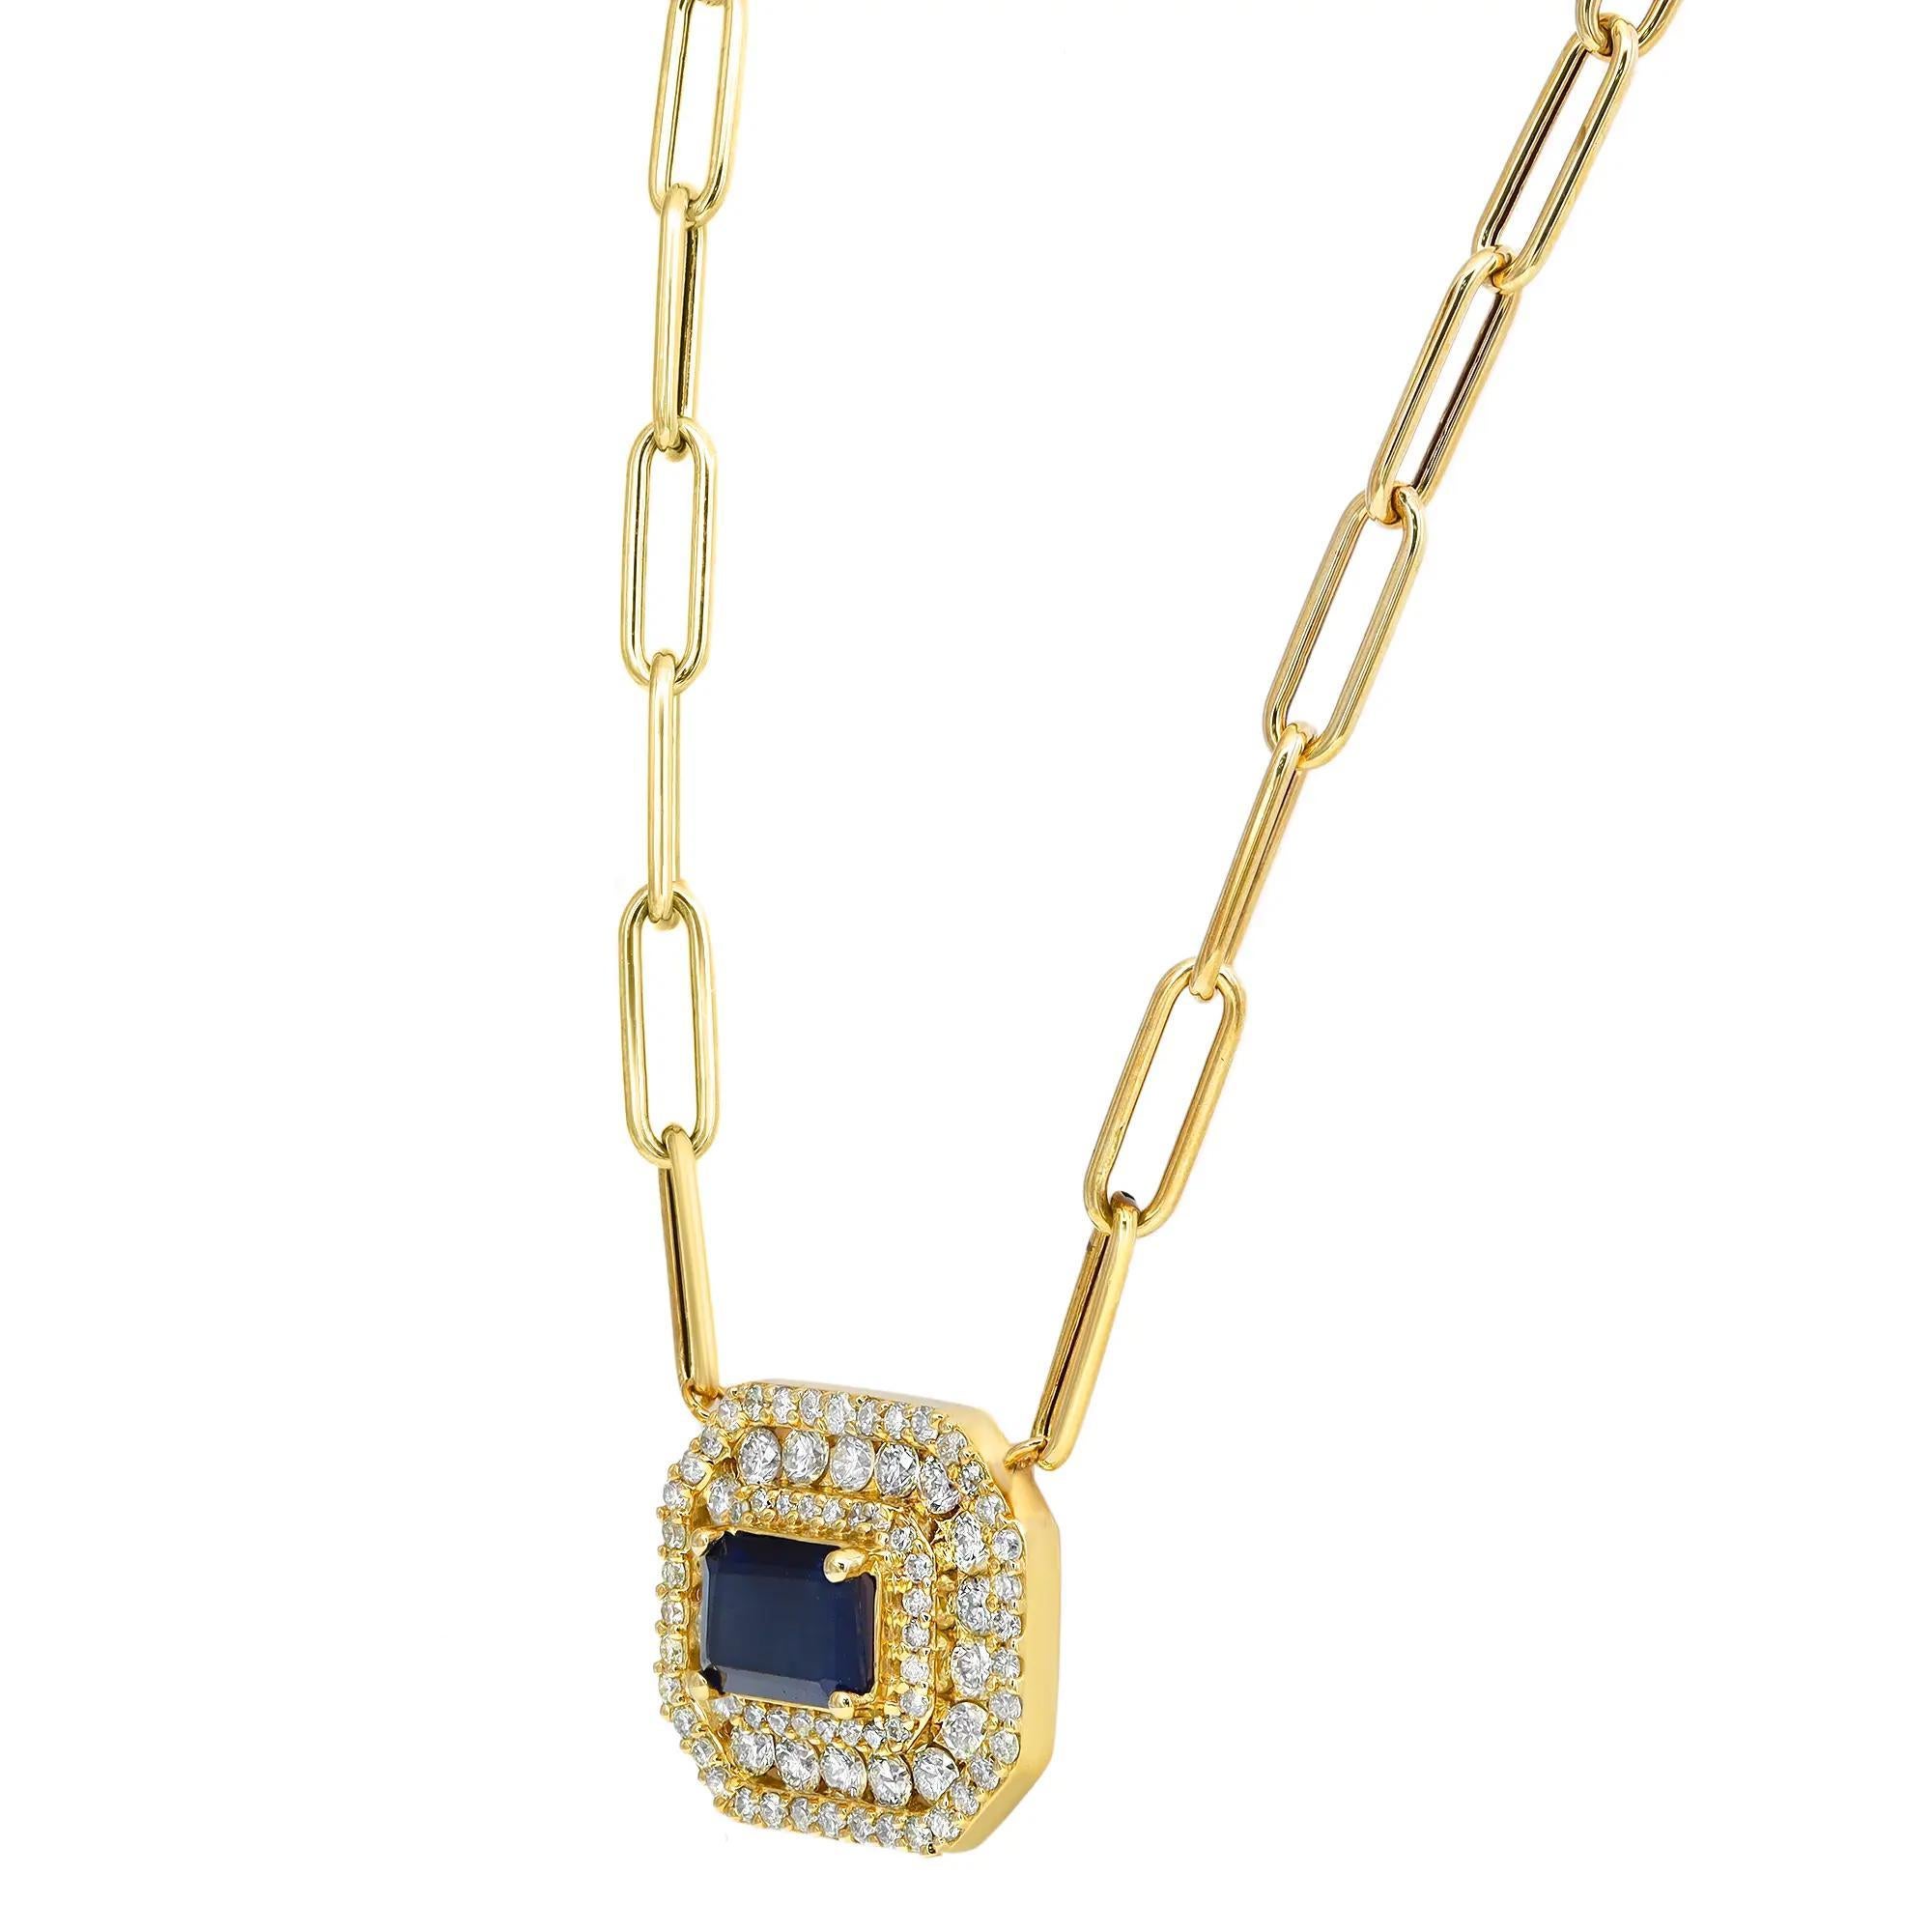 Bring brilliance to your look with this fabulous blue sapphire and diamond pendant necklace. A perfect accent to everyday and evening looks with a touch of chic to any ensemble you pair it with. It features an octagon shape pendant showcasing a